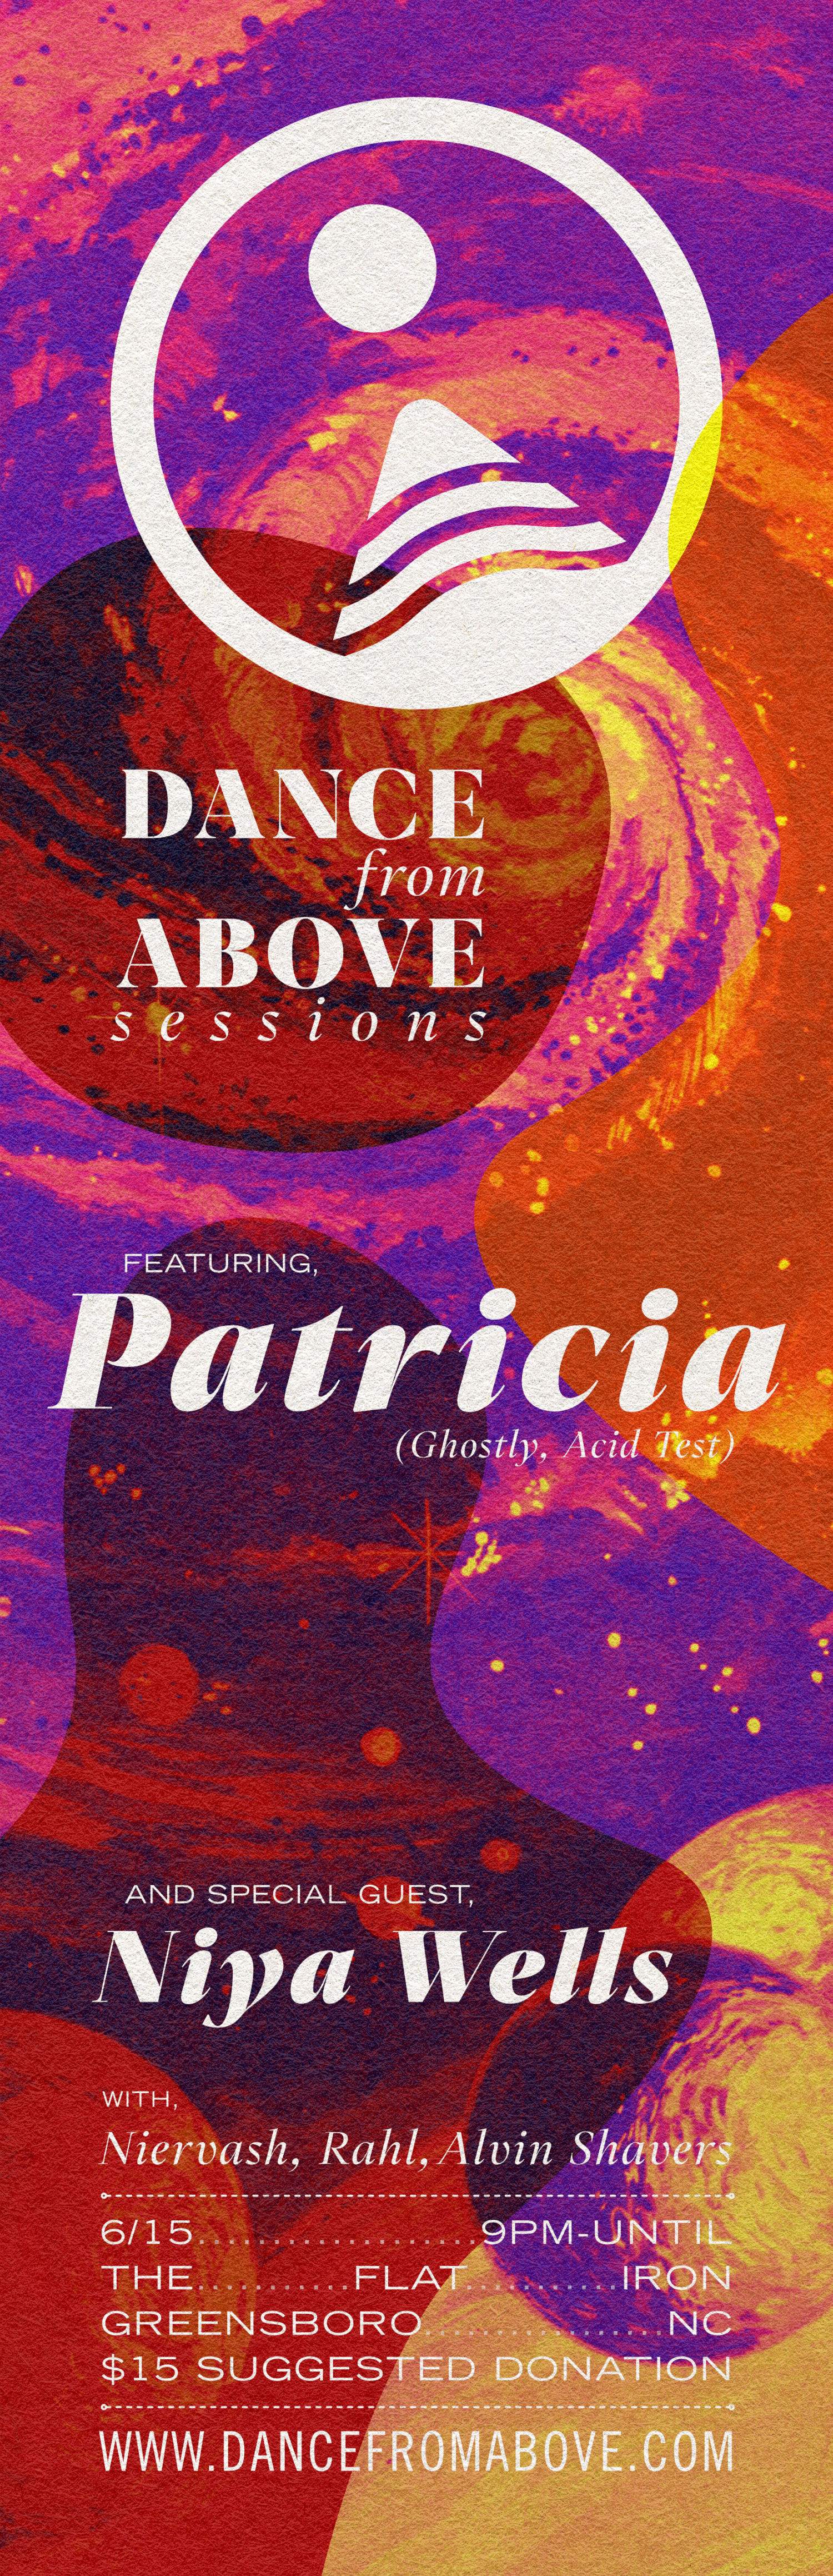 Dance From Above Sessions Featuring: Patricia + Special Guest: Niya Wells - Página frontal